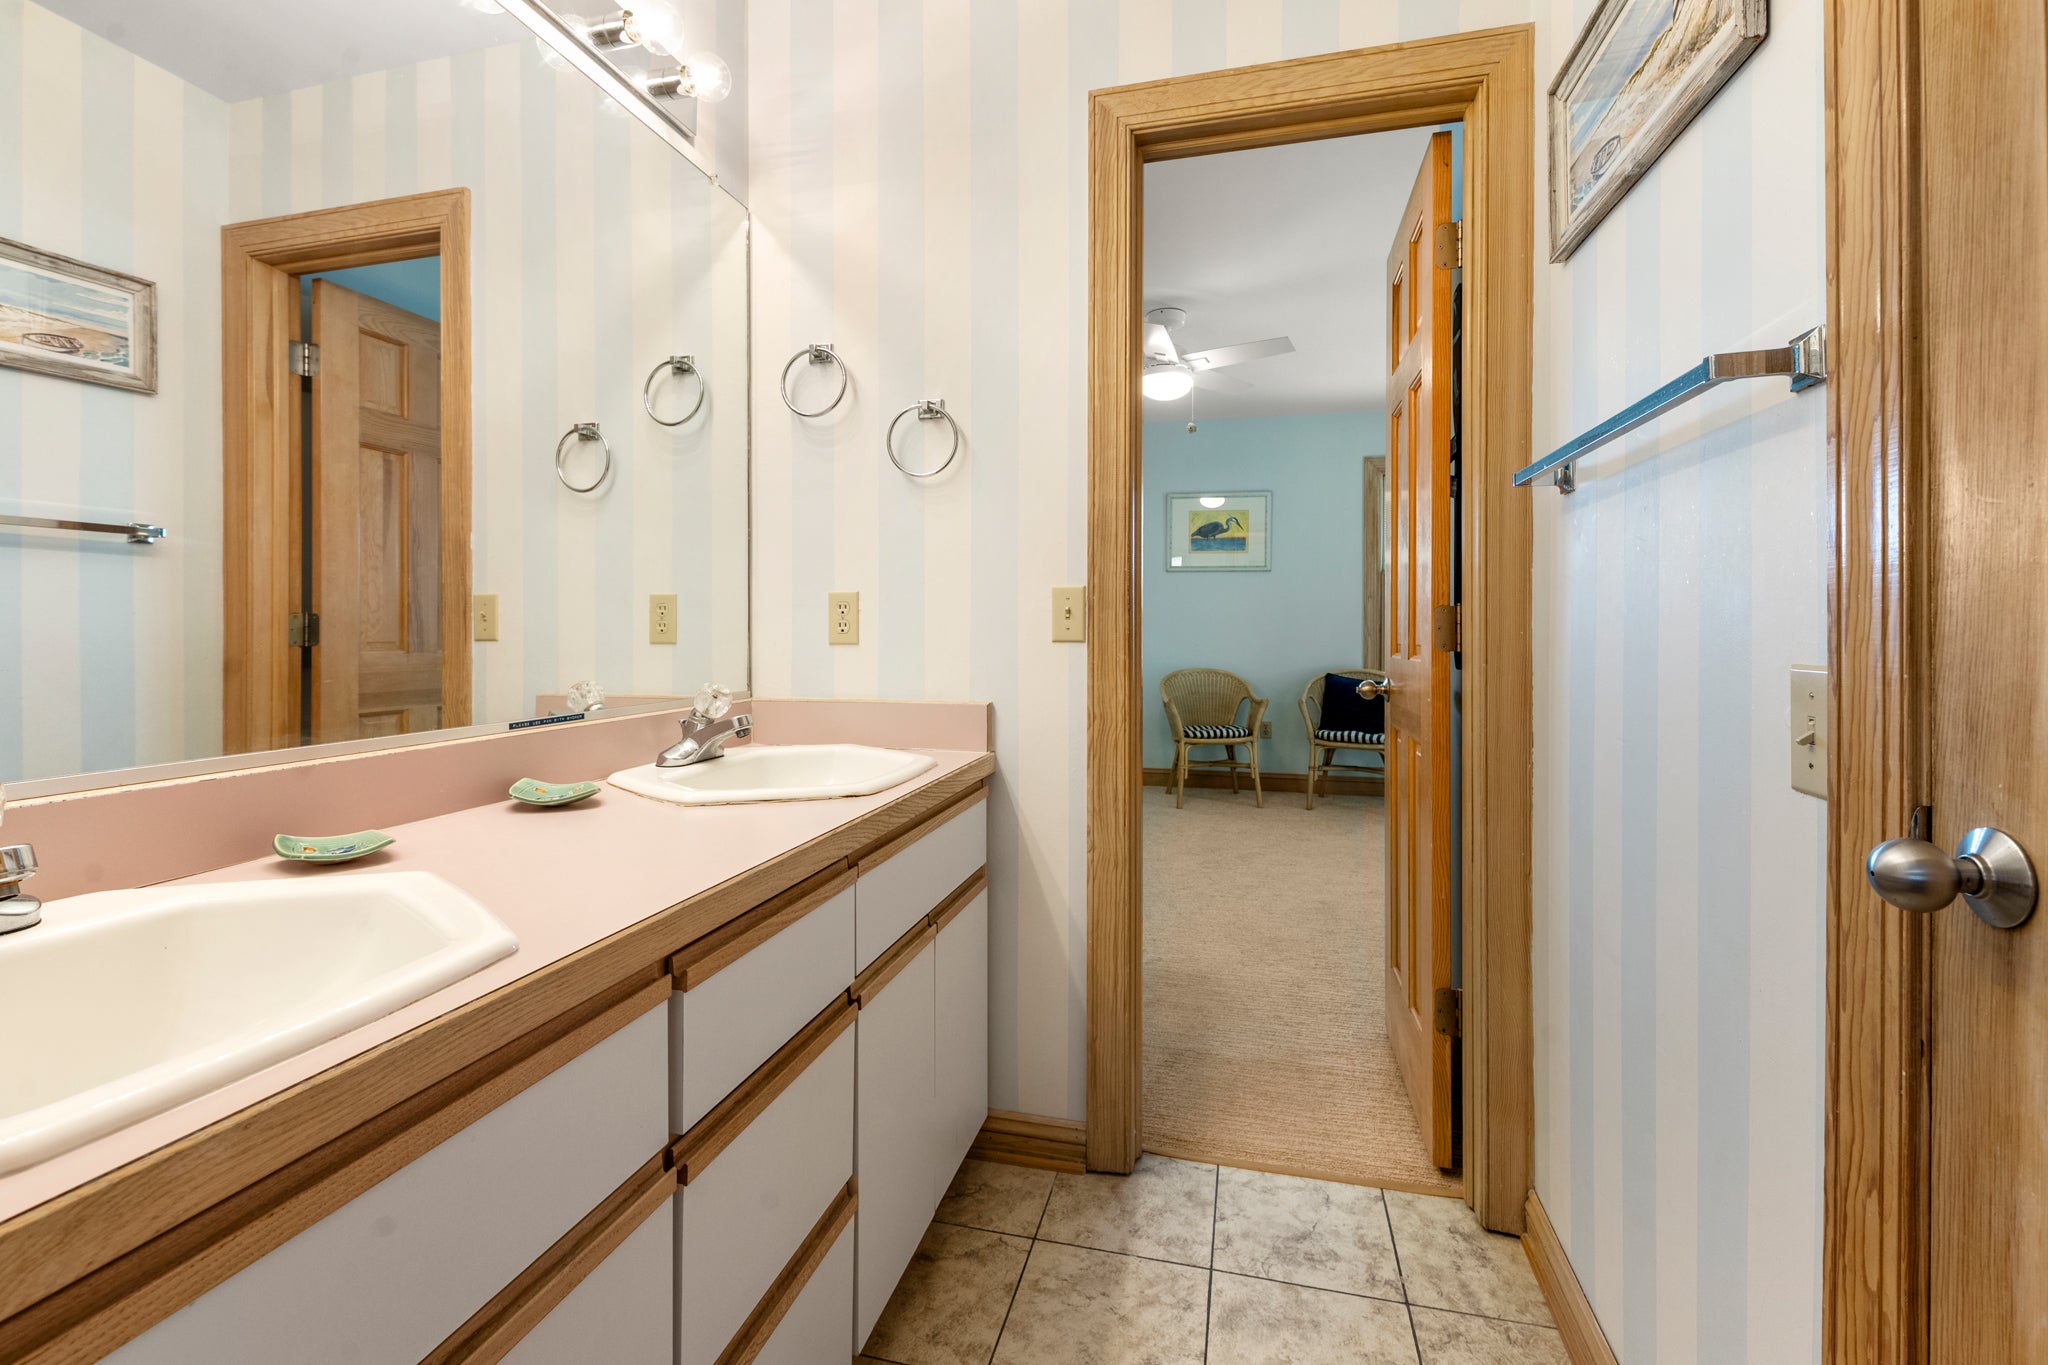 SS34: Five Forks South | Mid Level BR2/BR3 Shared Bath